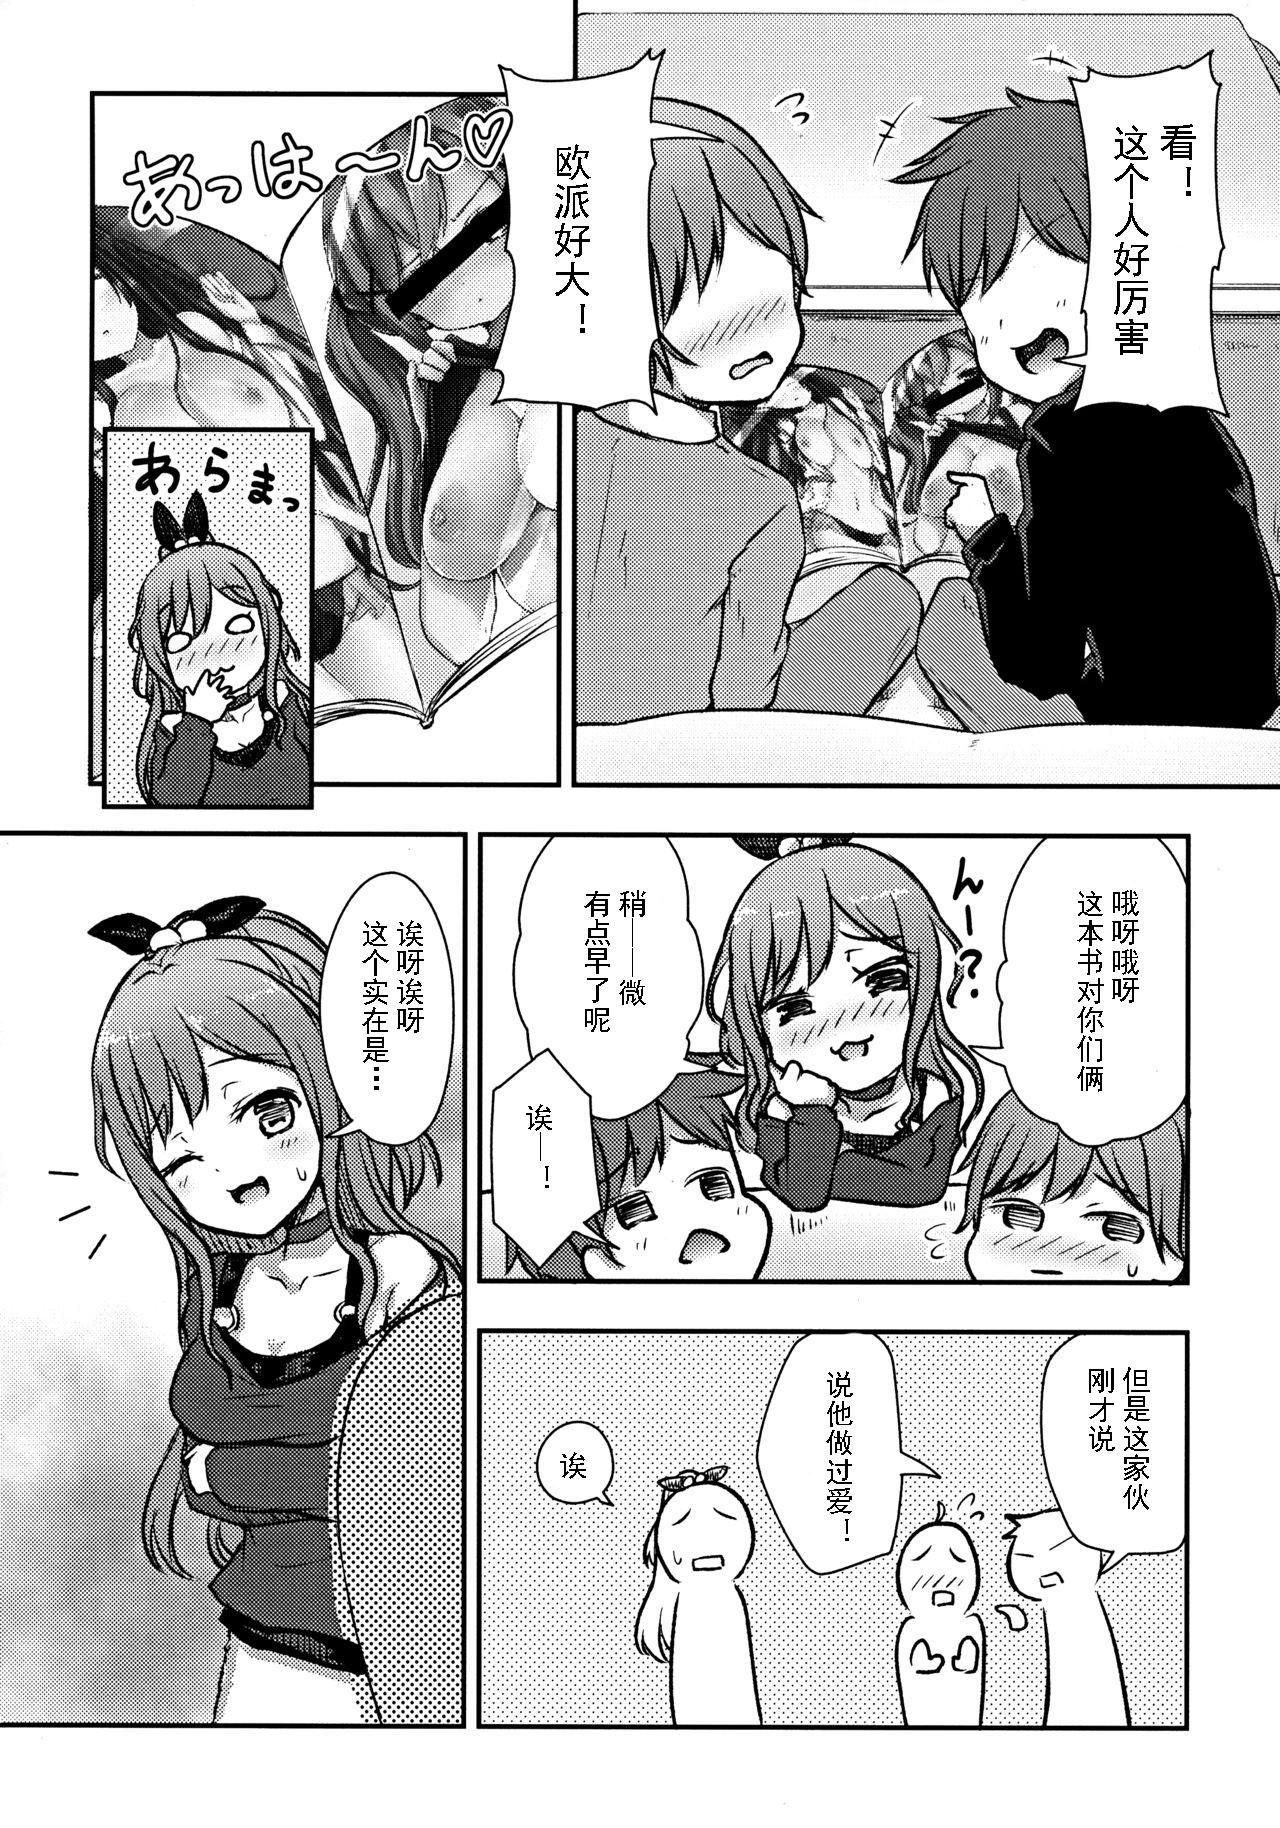 Banho Hearty Hybrid Household - Bang dream Consolo - Page 3